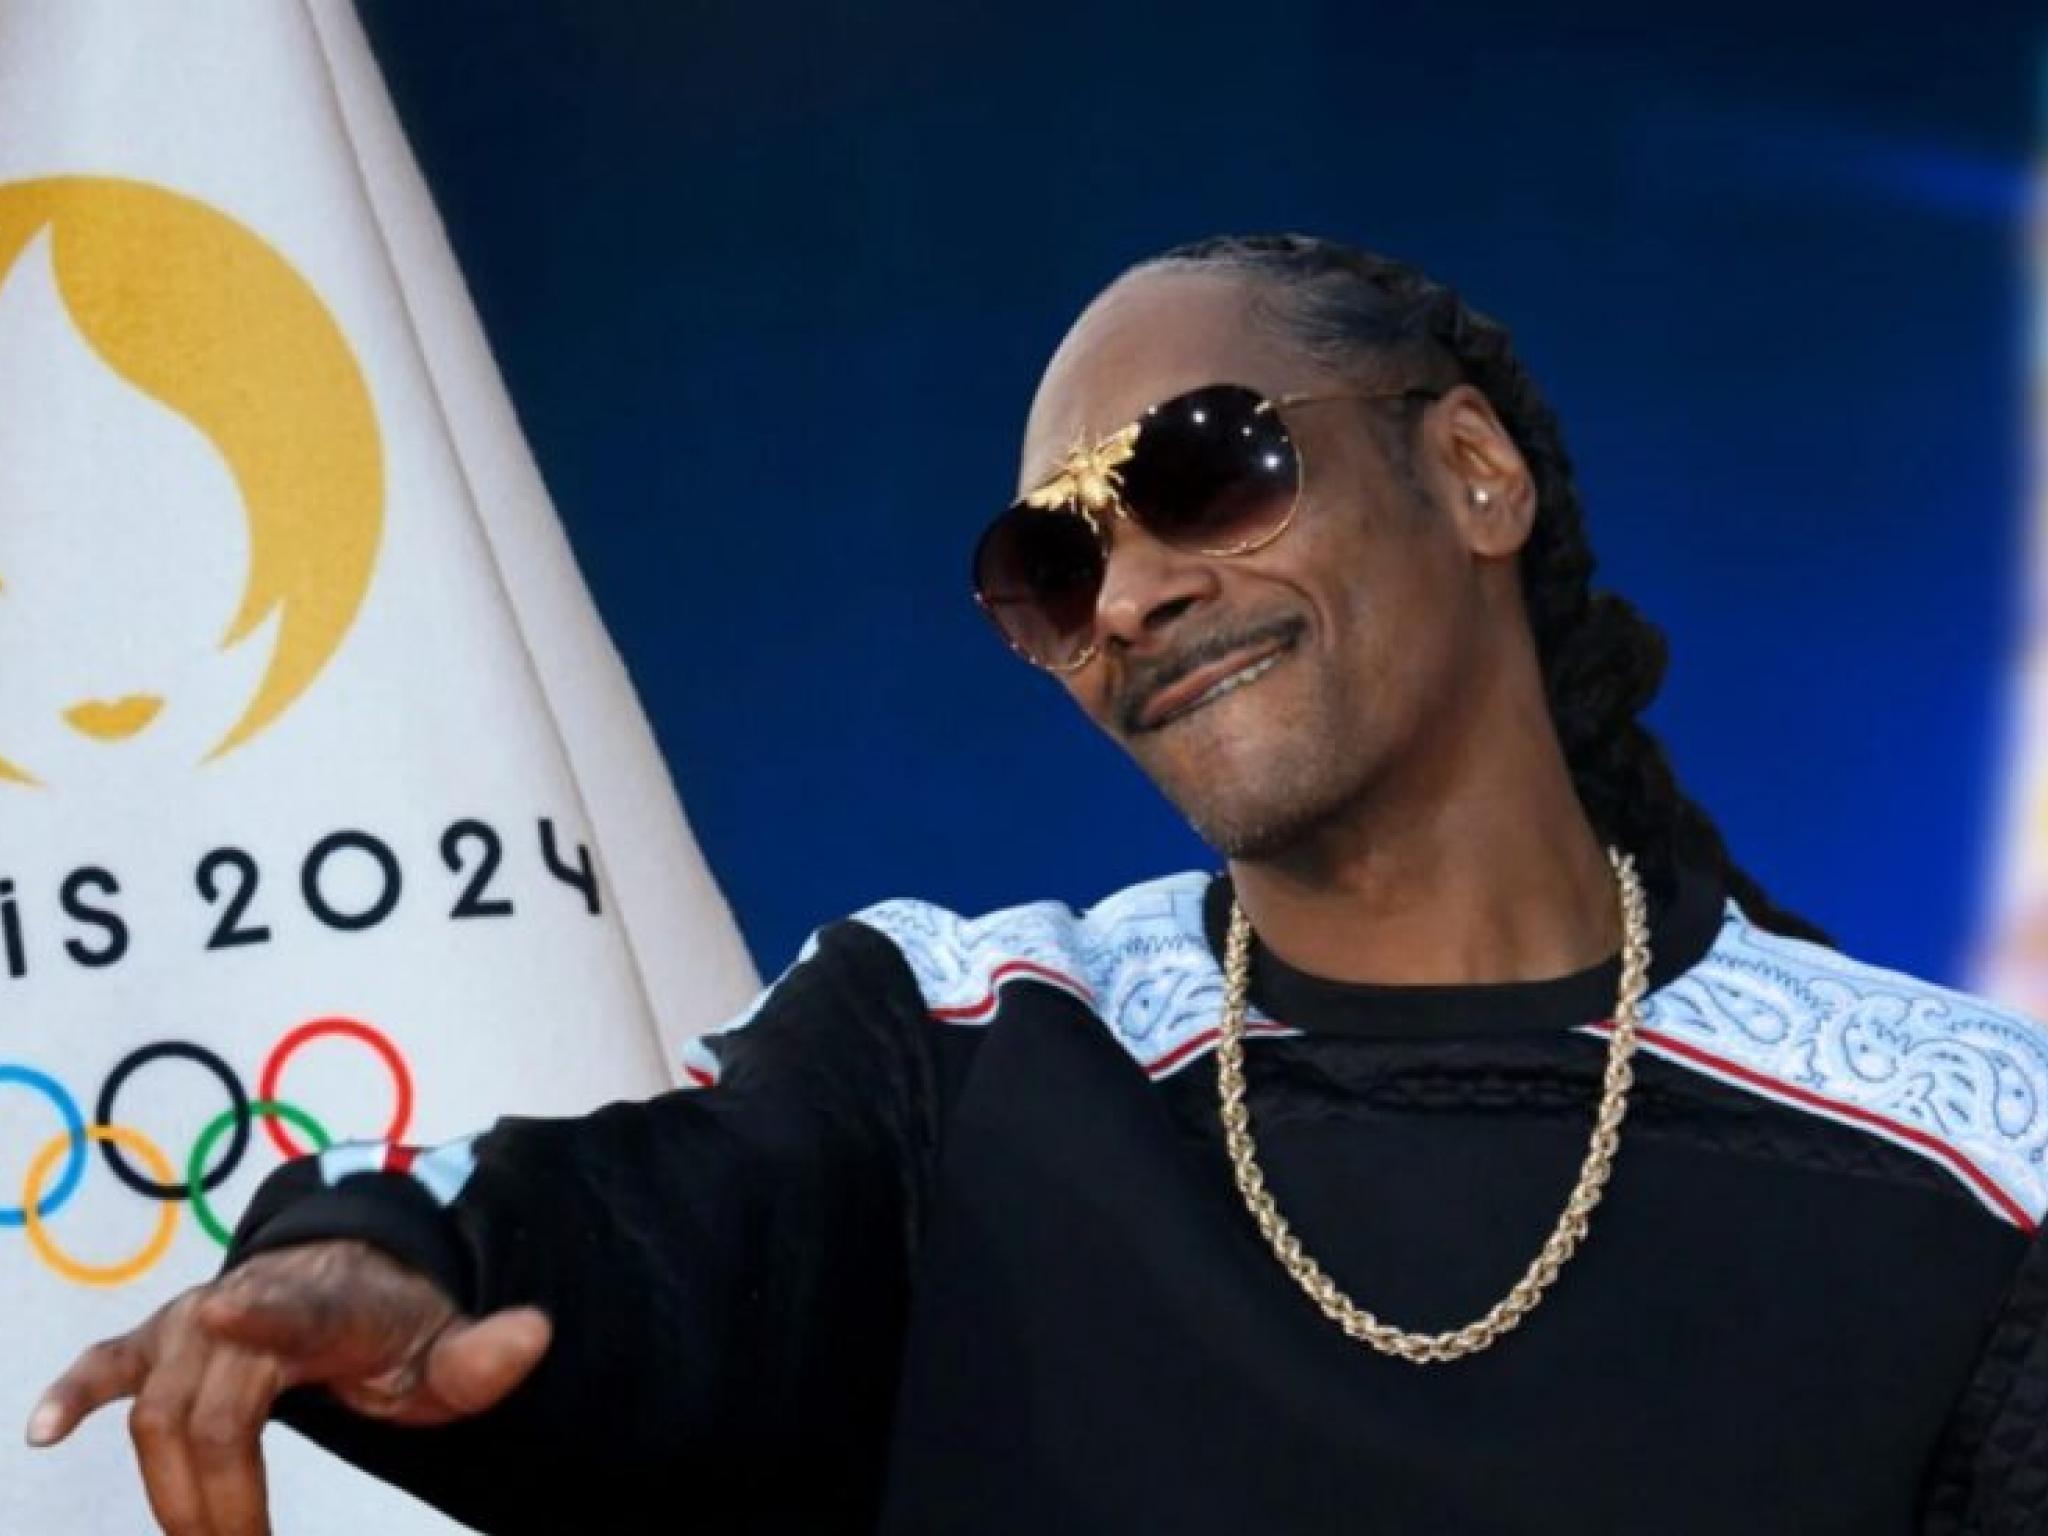  snoop-dogg-isnt-worried-weed-is-illegal-in-france-as-he-heads-over-to-cover-olympics-with-nbc-im-a-very-legal-guy 